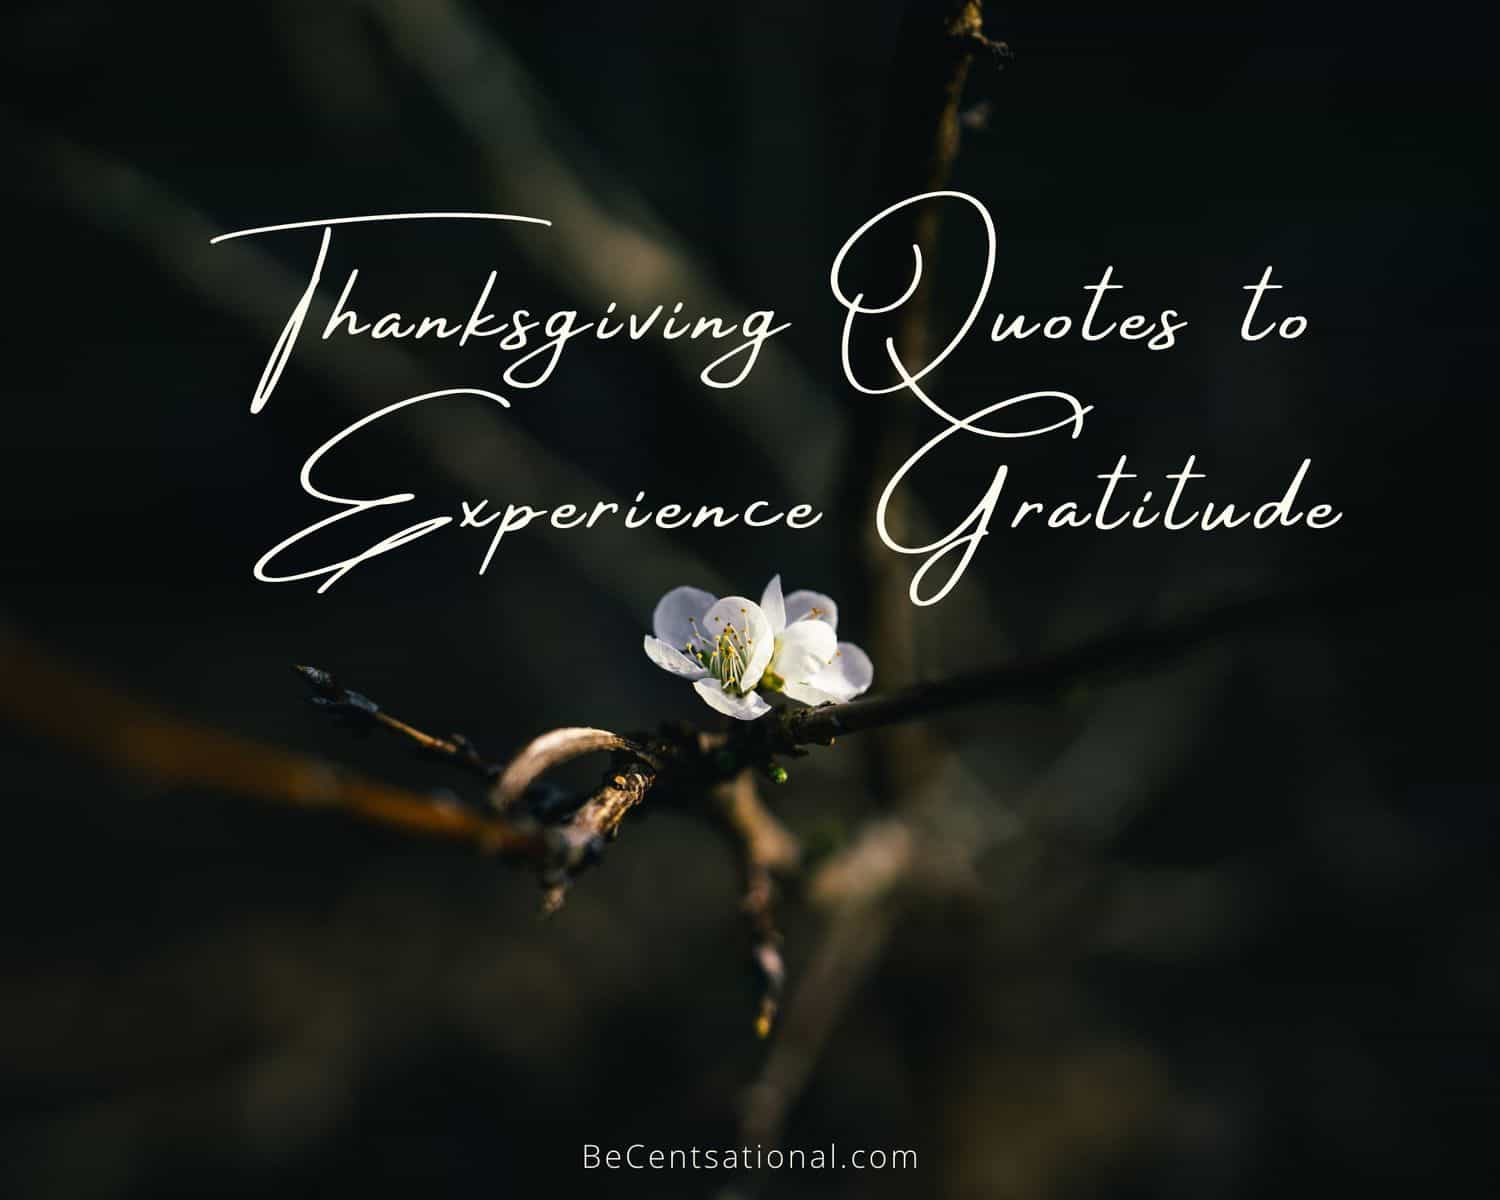 30 Thanksgiving Quotes to Experience Gratitude